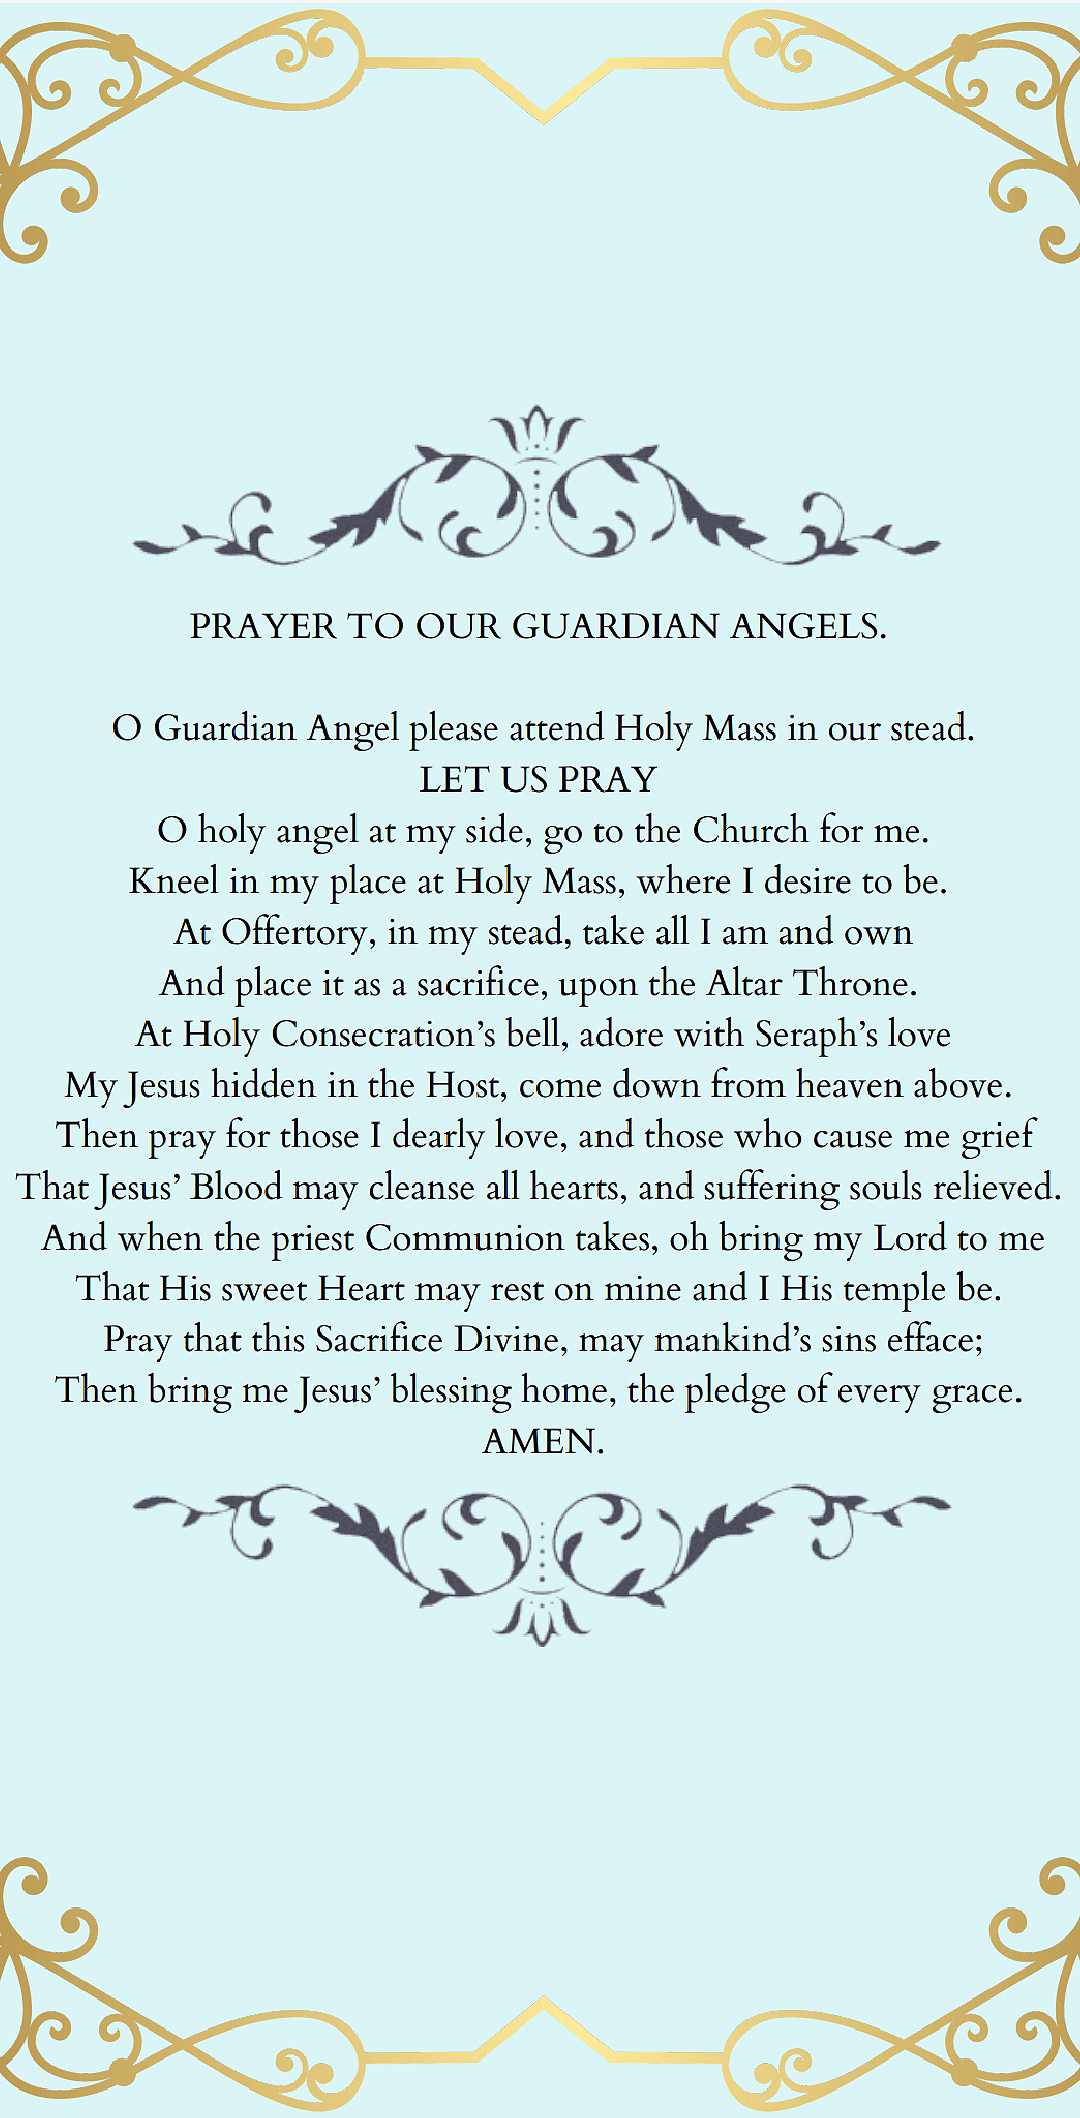 Prayer to Our Guardian Angel to attend Mass